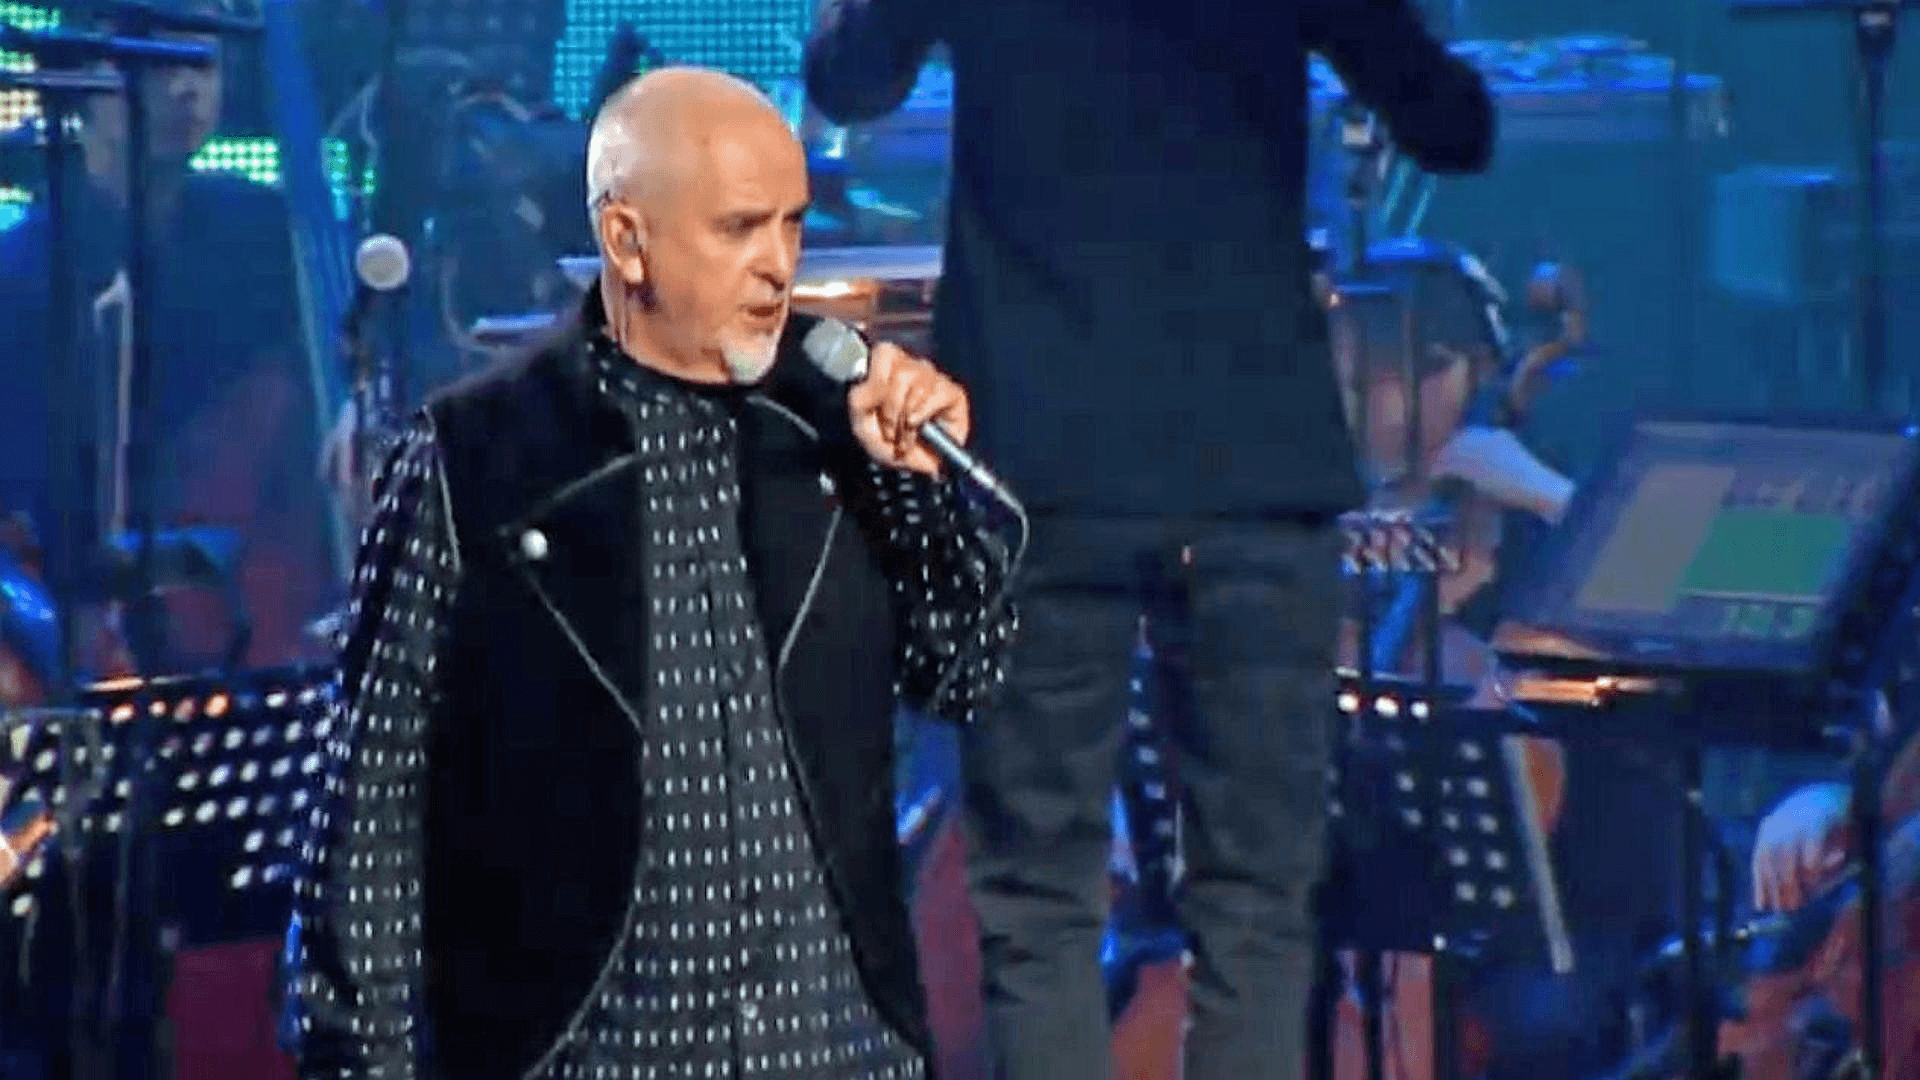 Peter Gabriel - New Blood: Live in London